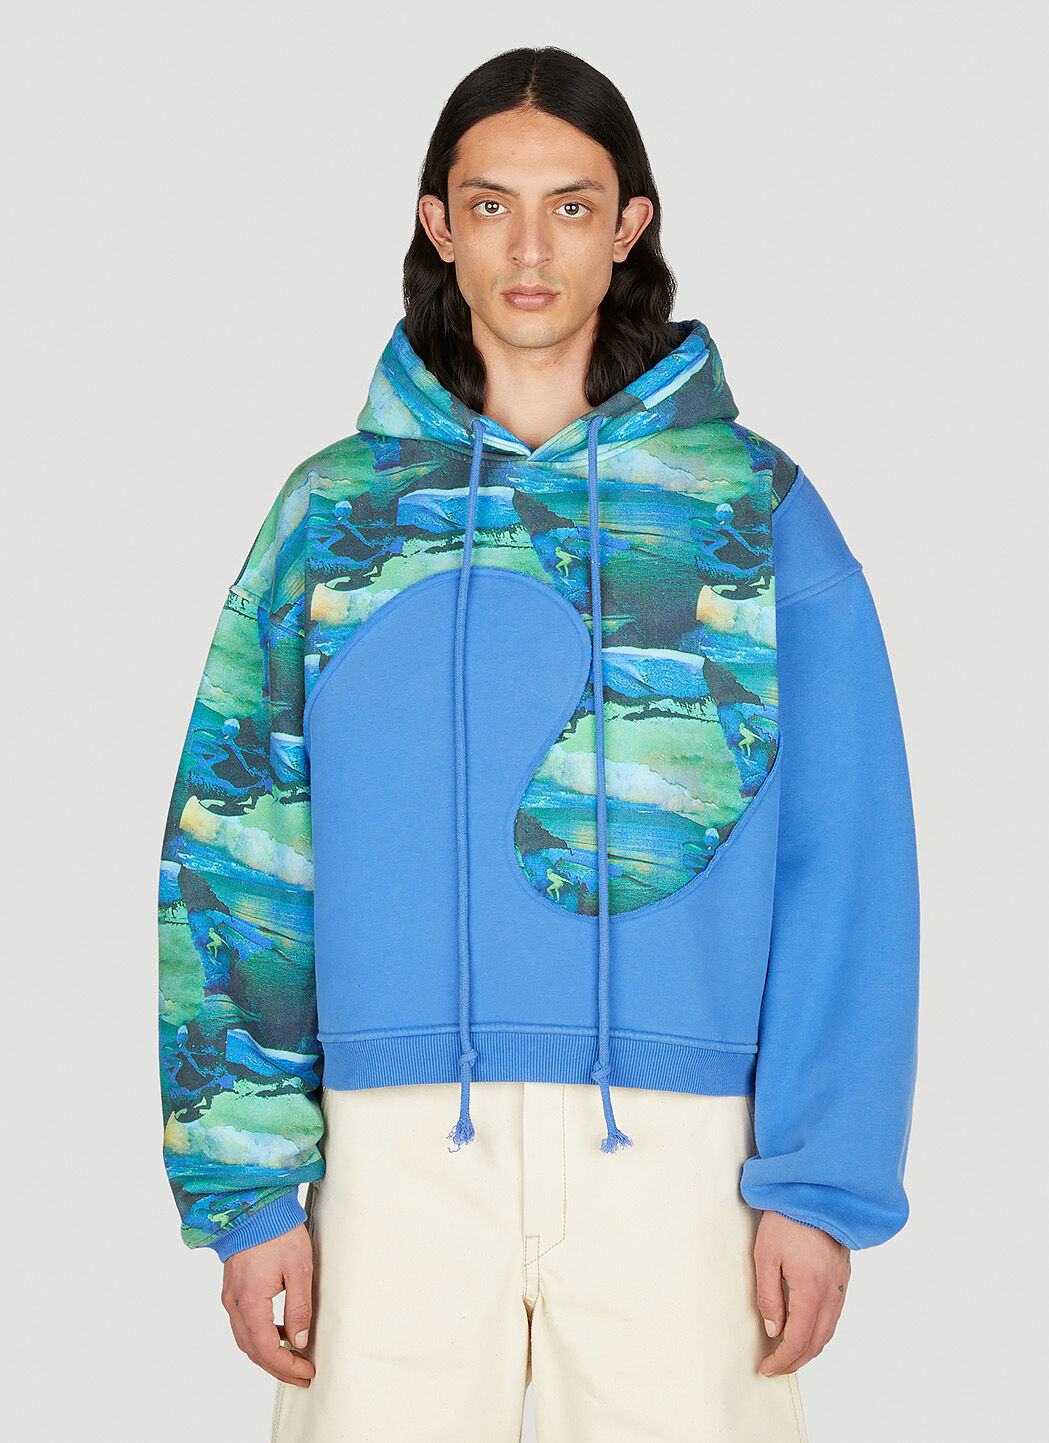 ERL Blue & Gray Printed Puffer Jacket